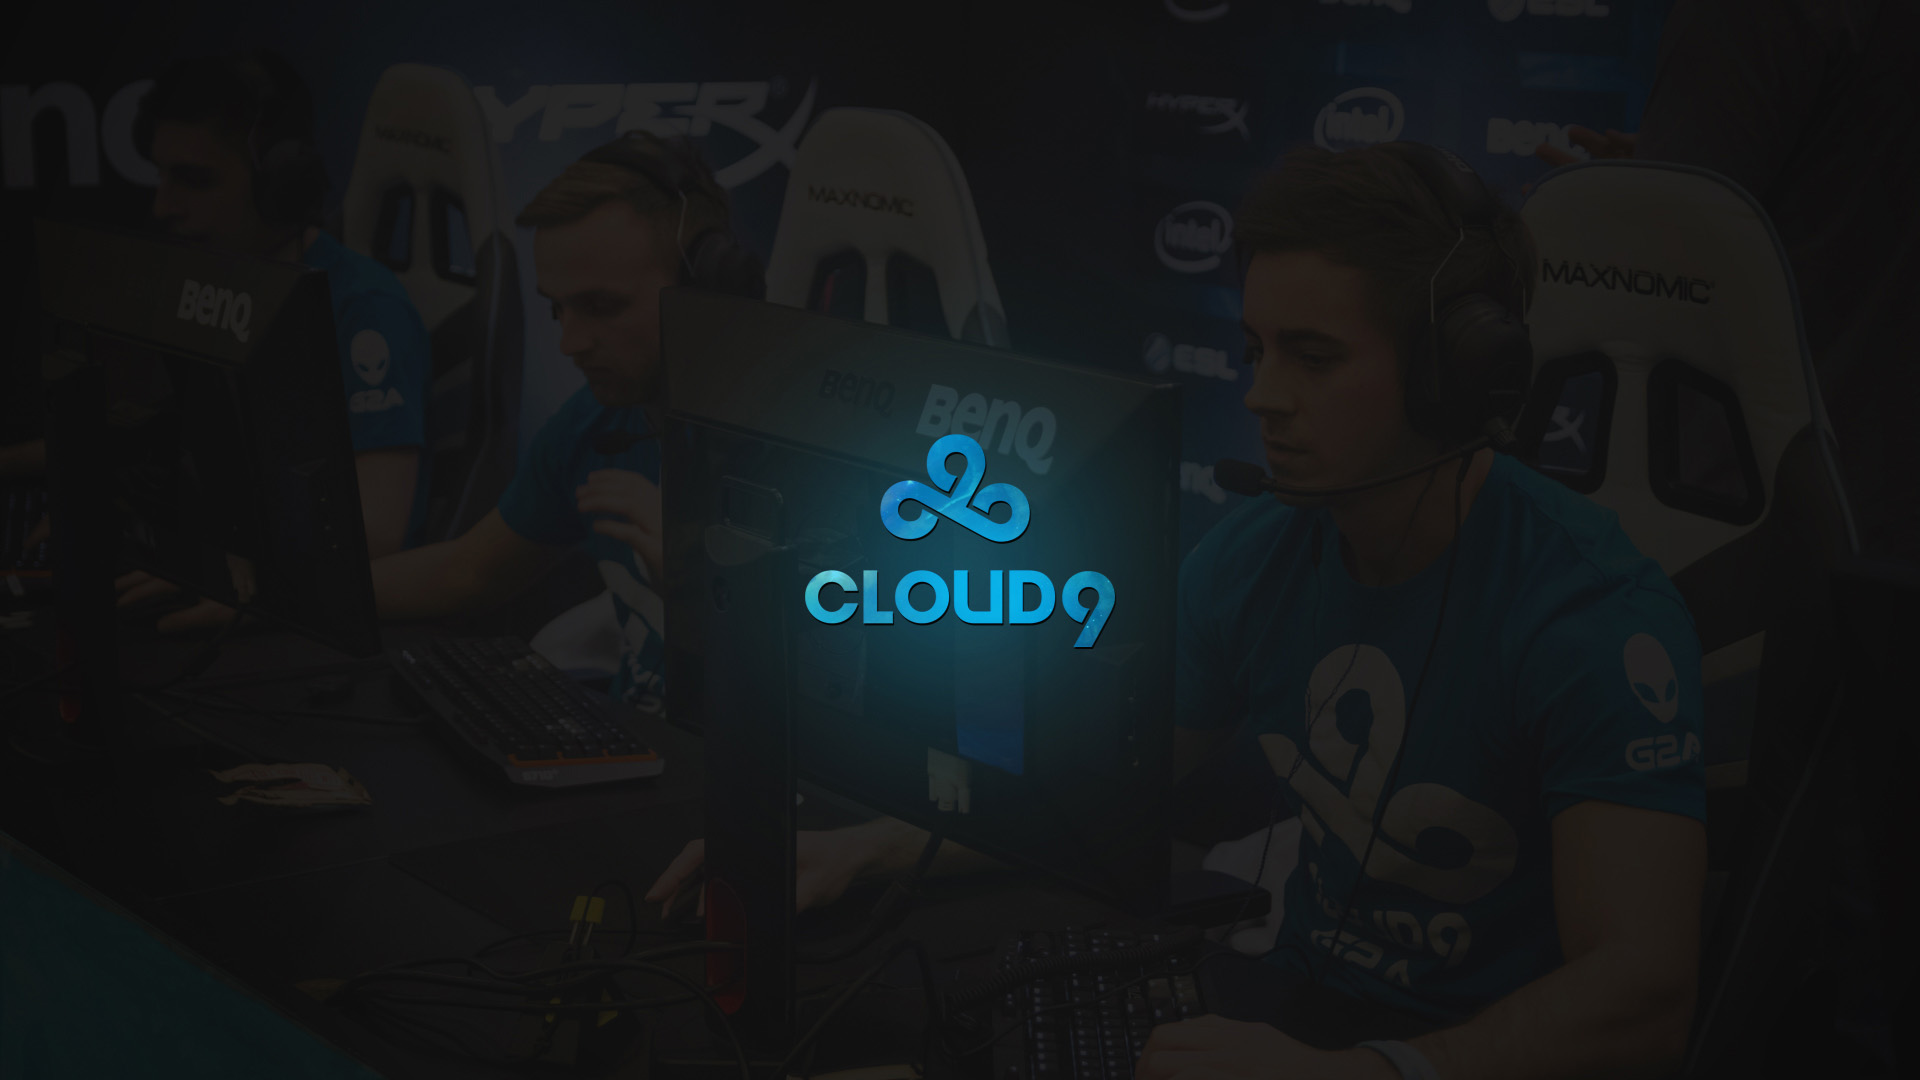 These Cloud9 Wallpaper Include